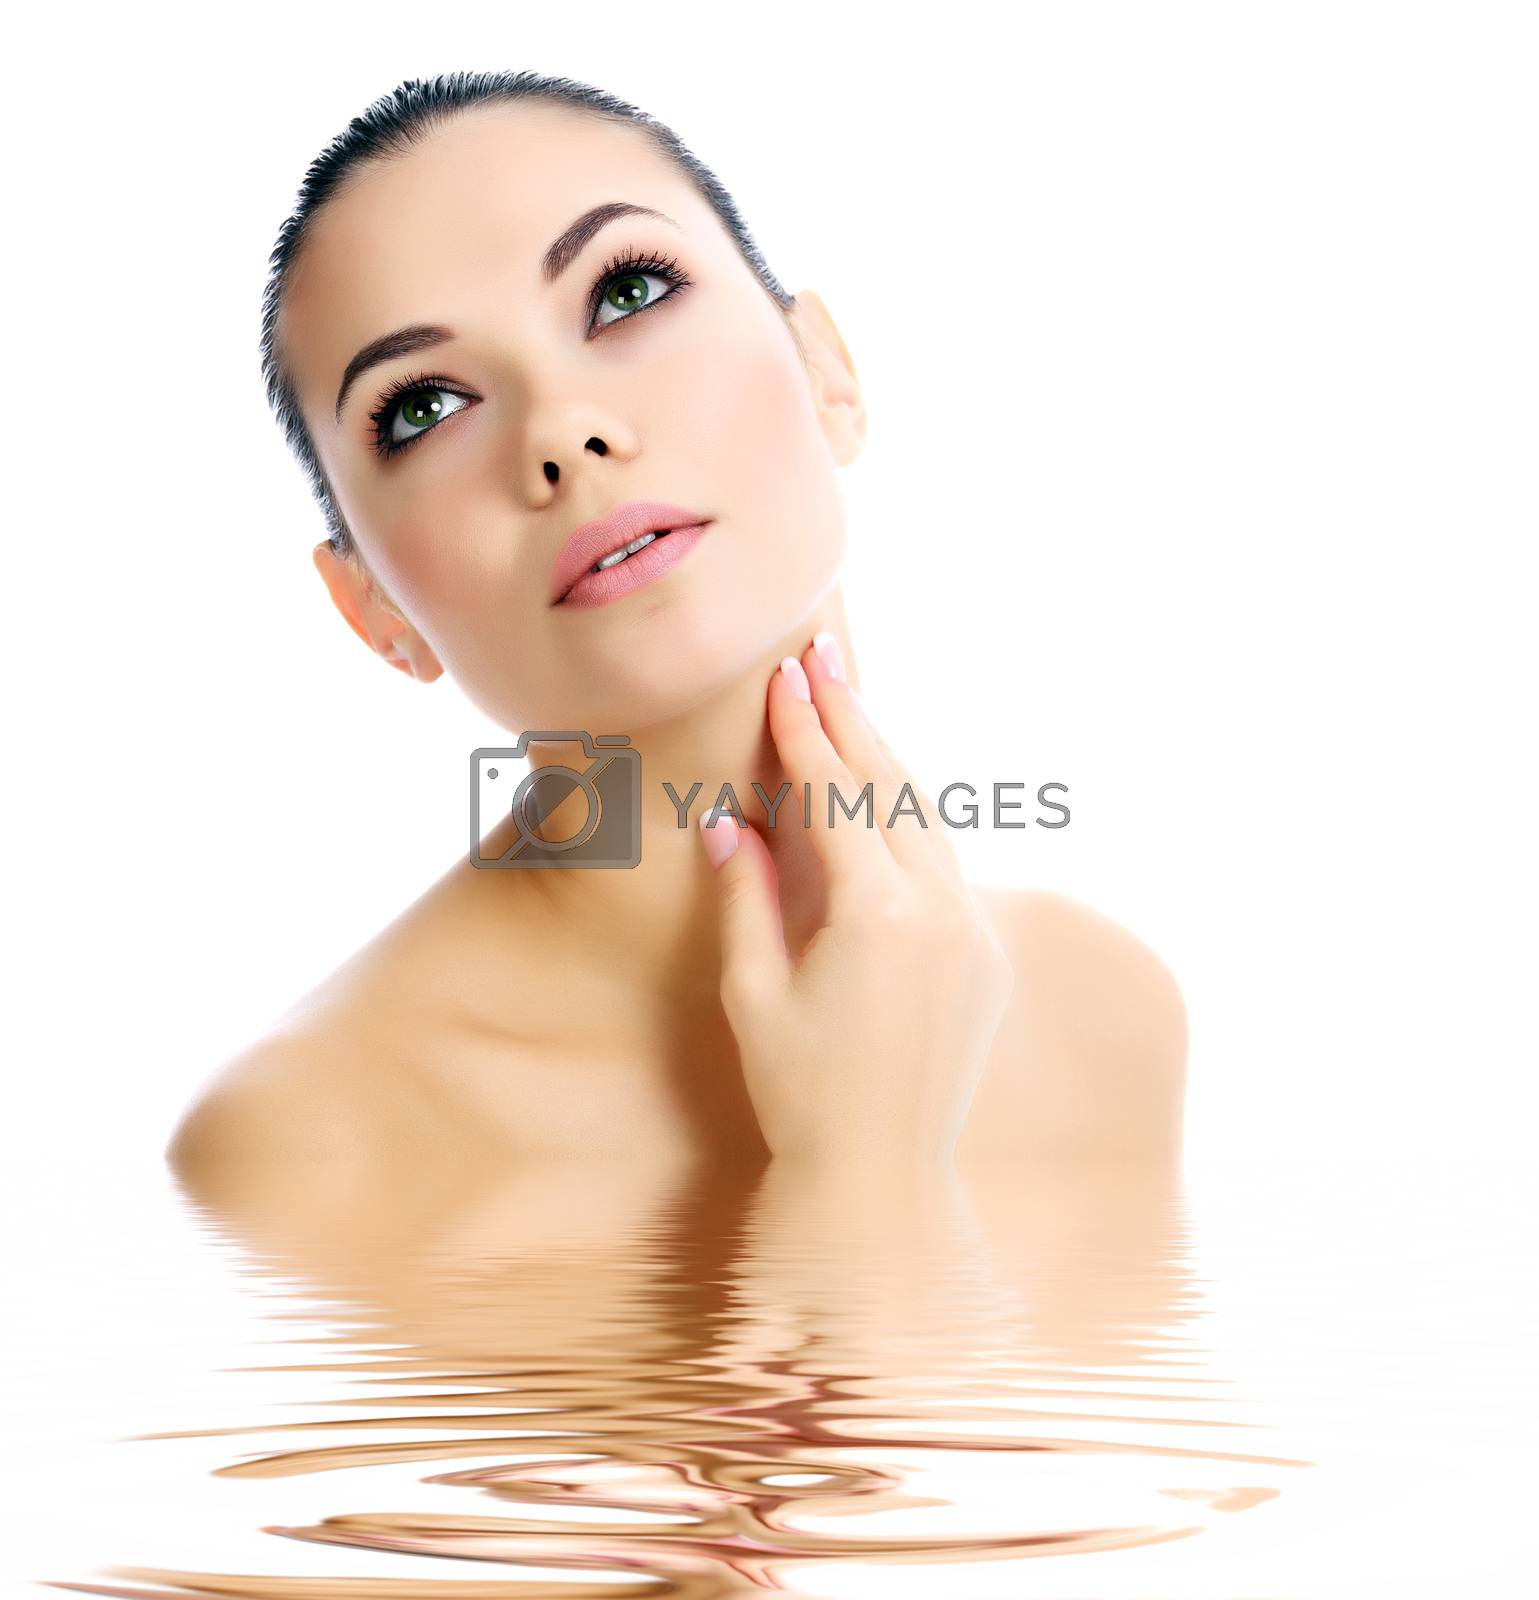 Royalty free image of Beautiful female with clean fresh skin, white background by Nobilior